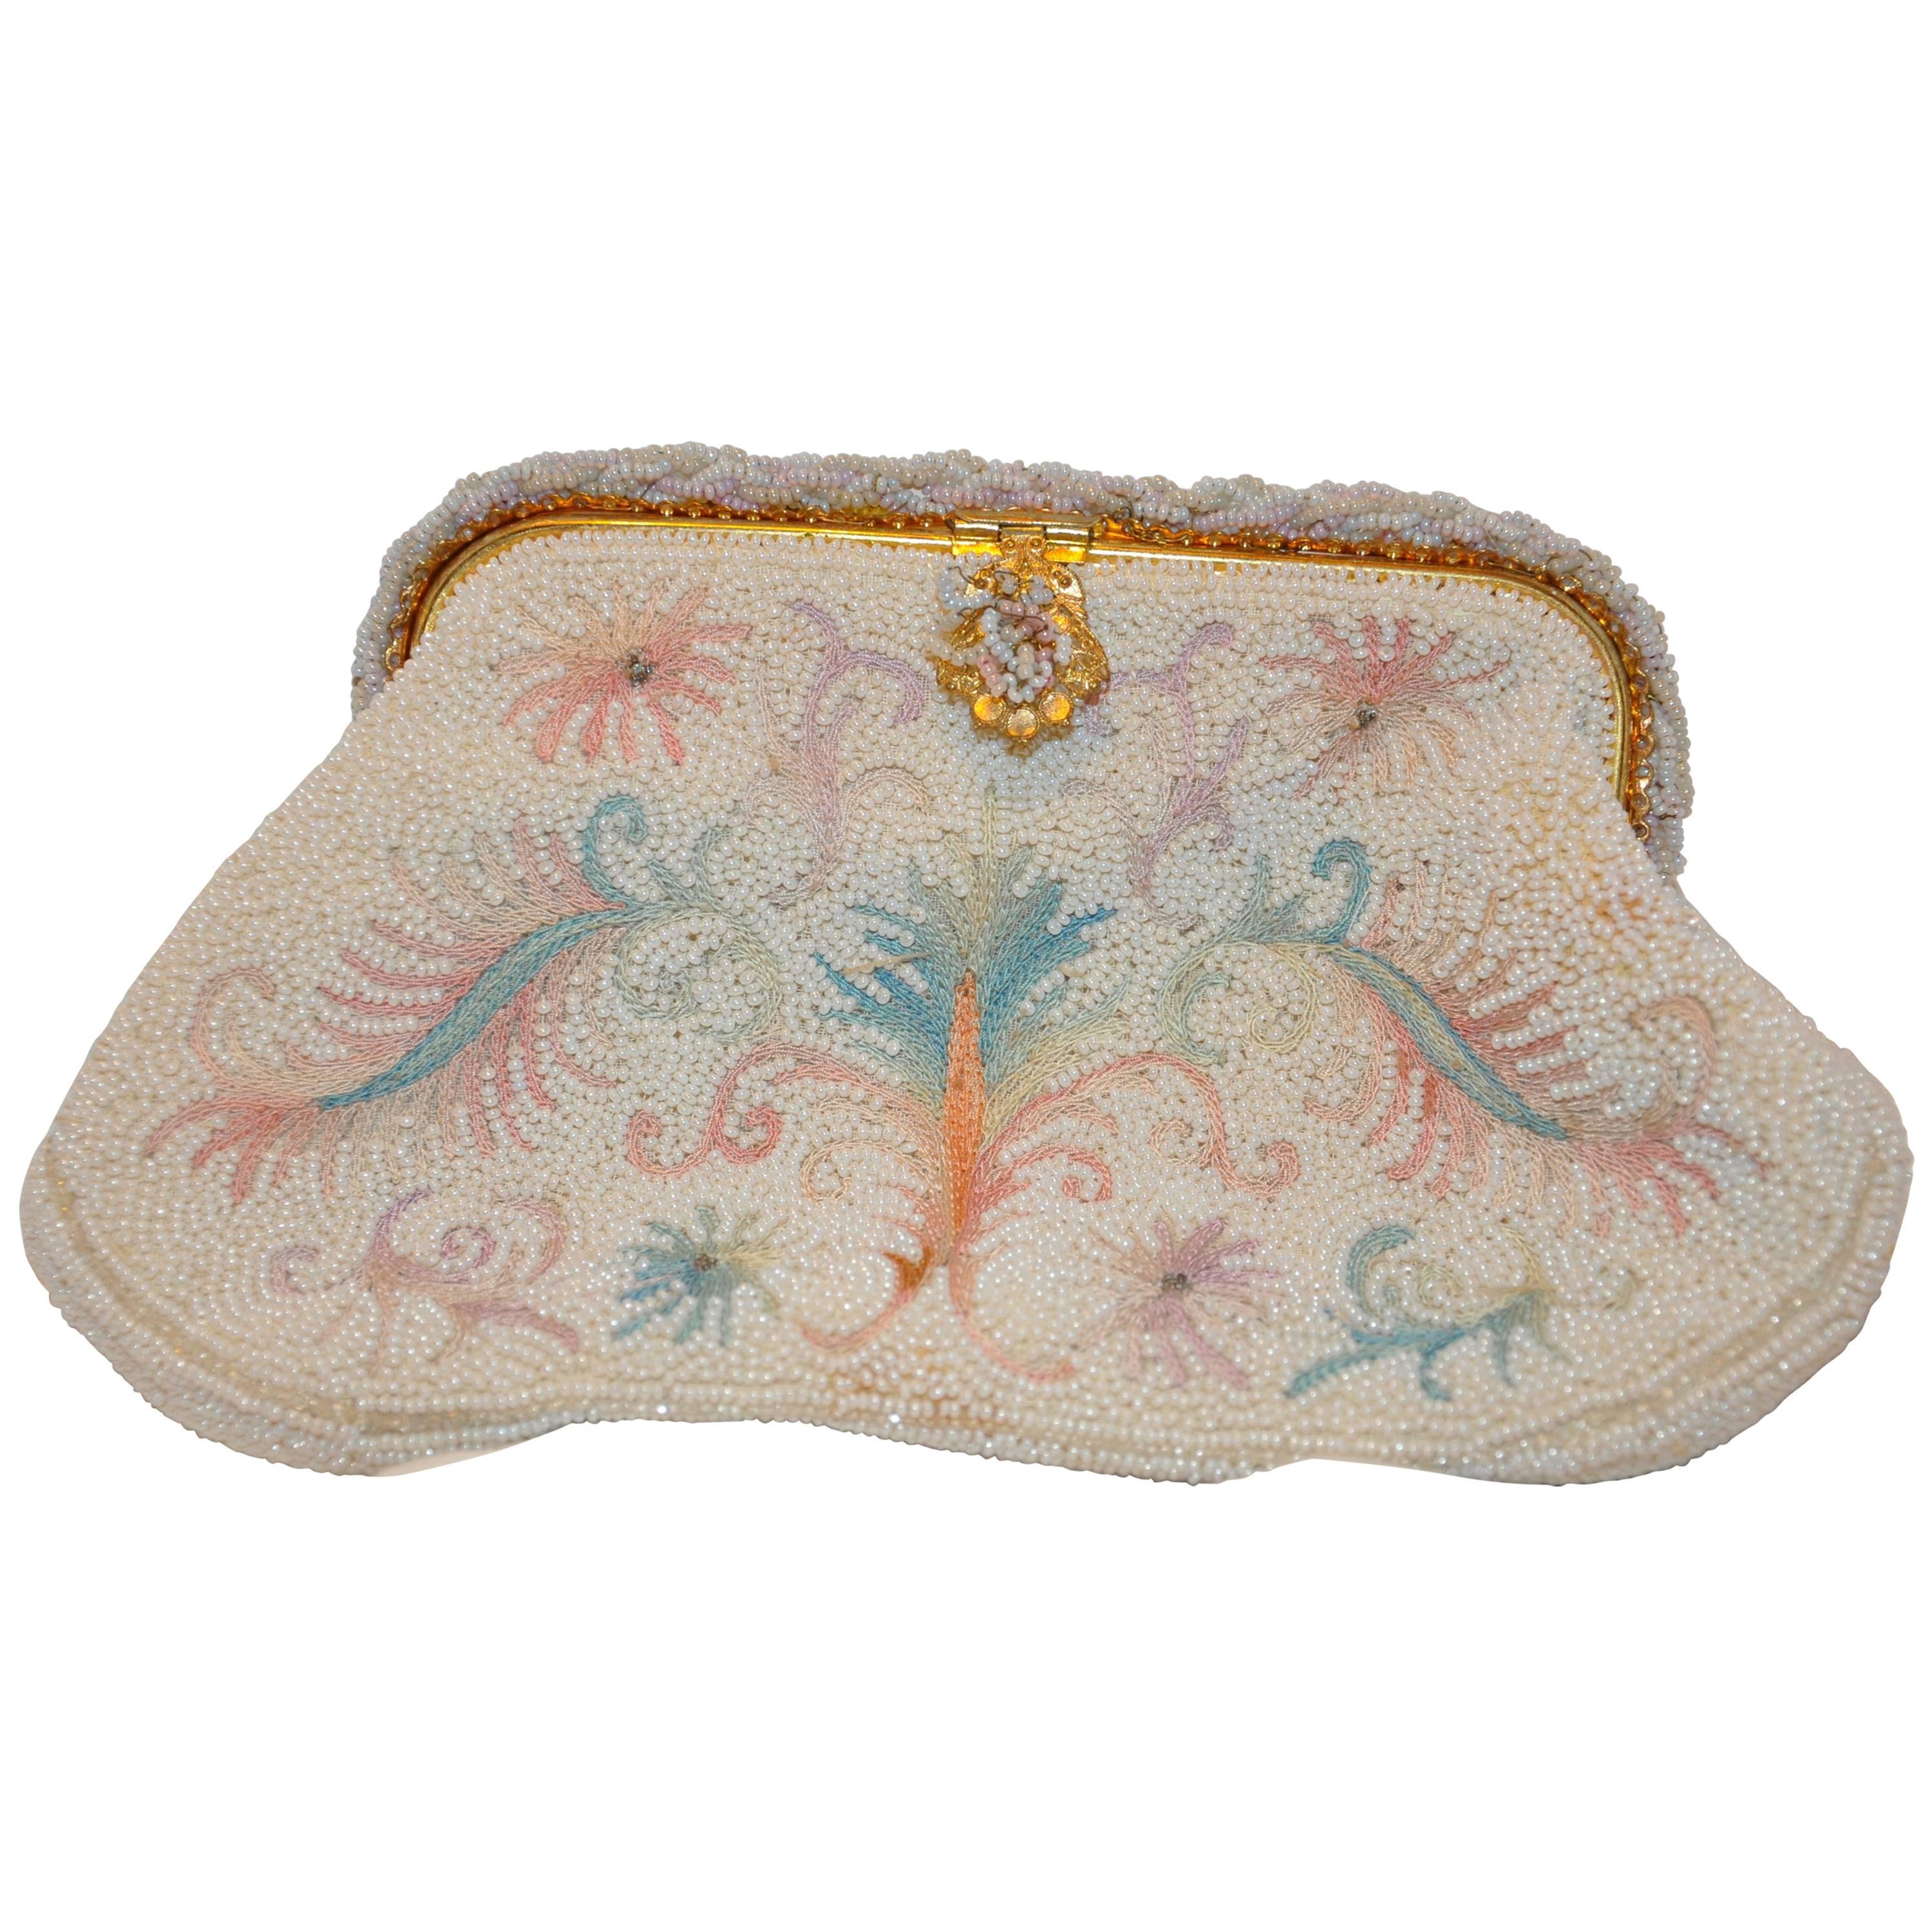 Walborg Hand-Beaded Micro Seed & Hand-Embrodiered "Floral & Leafs" Clutch For Sale